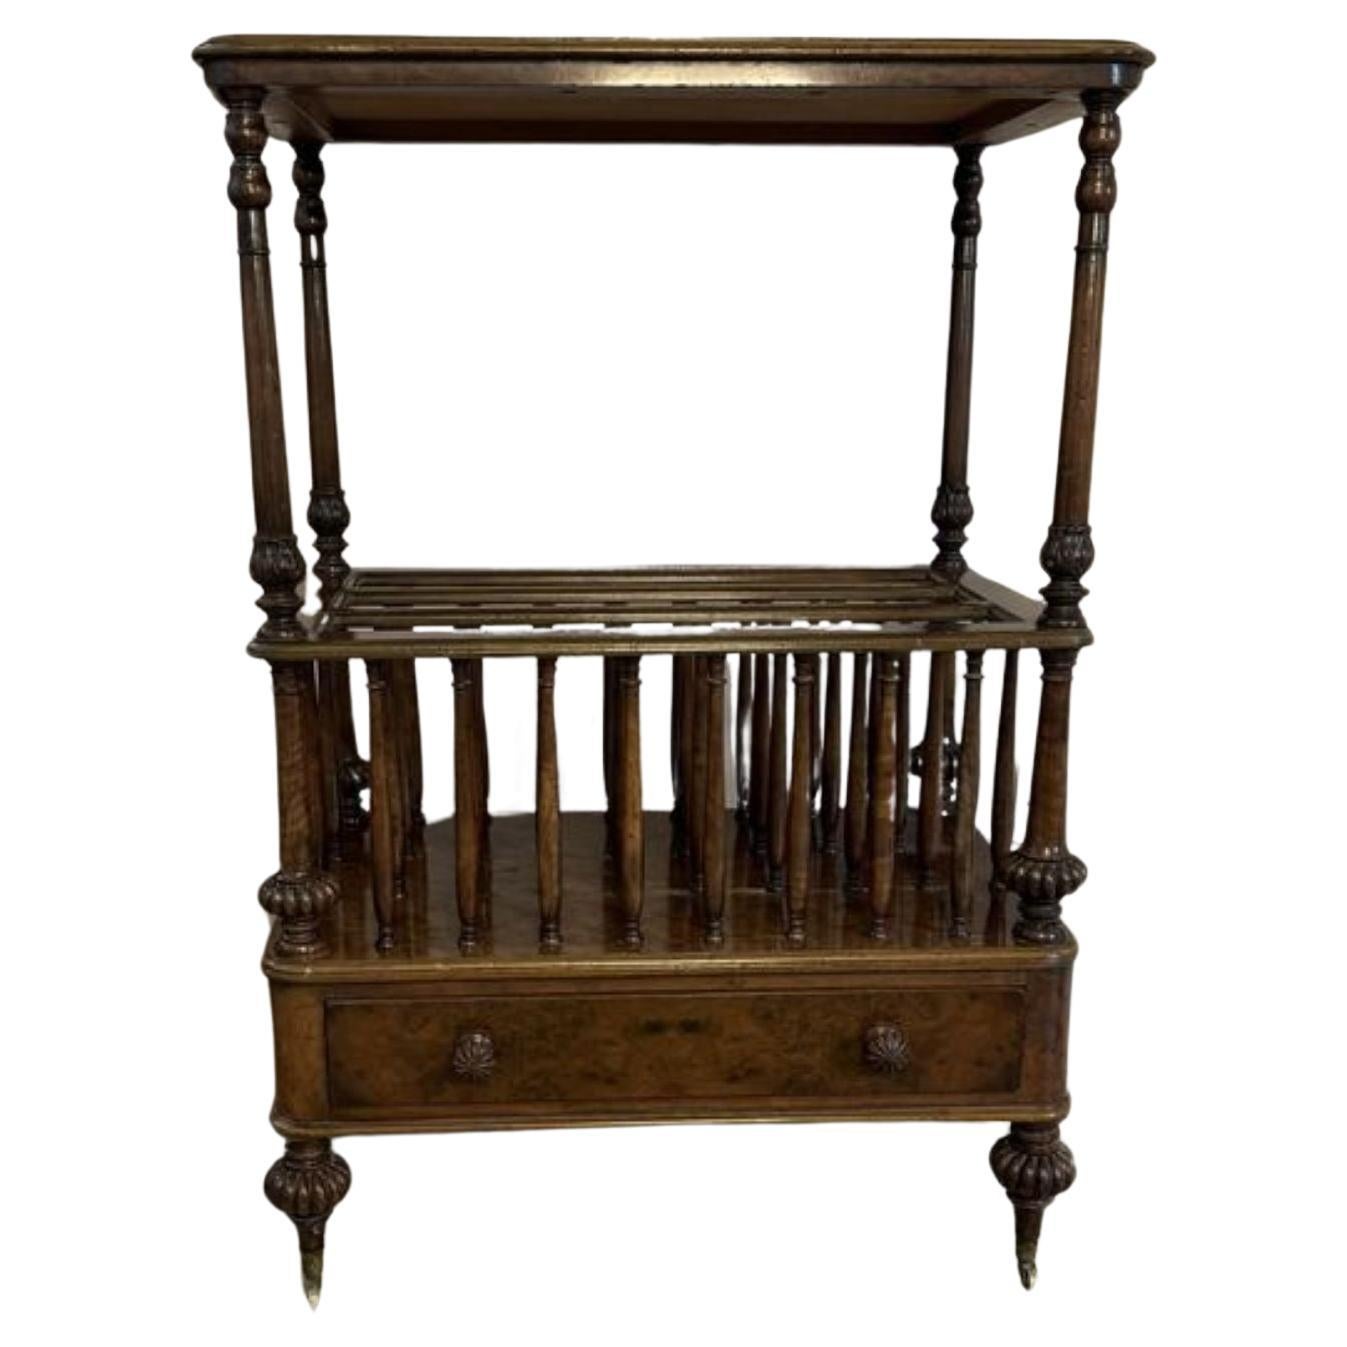 Early Victorian Furniture